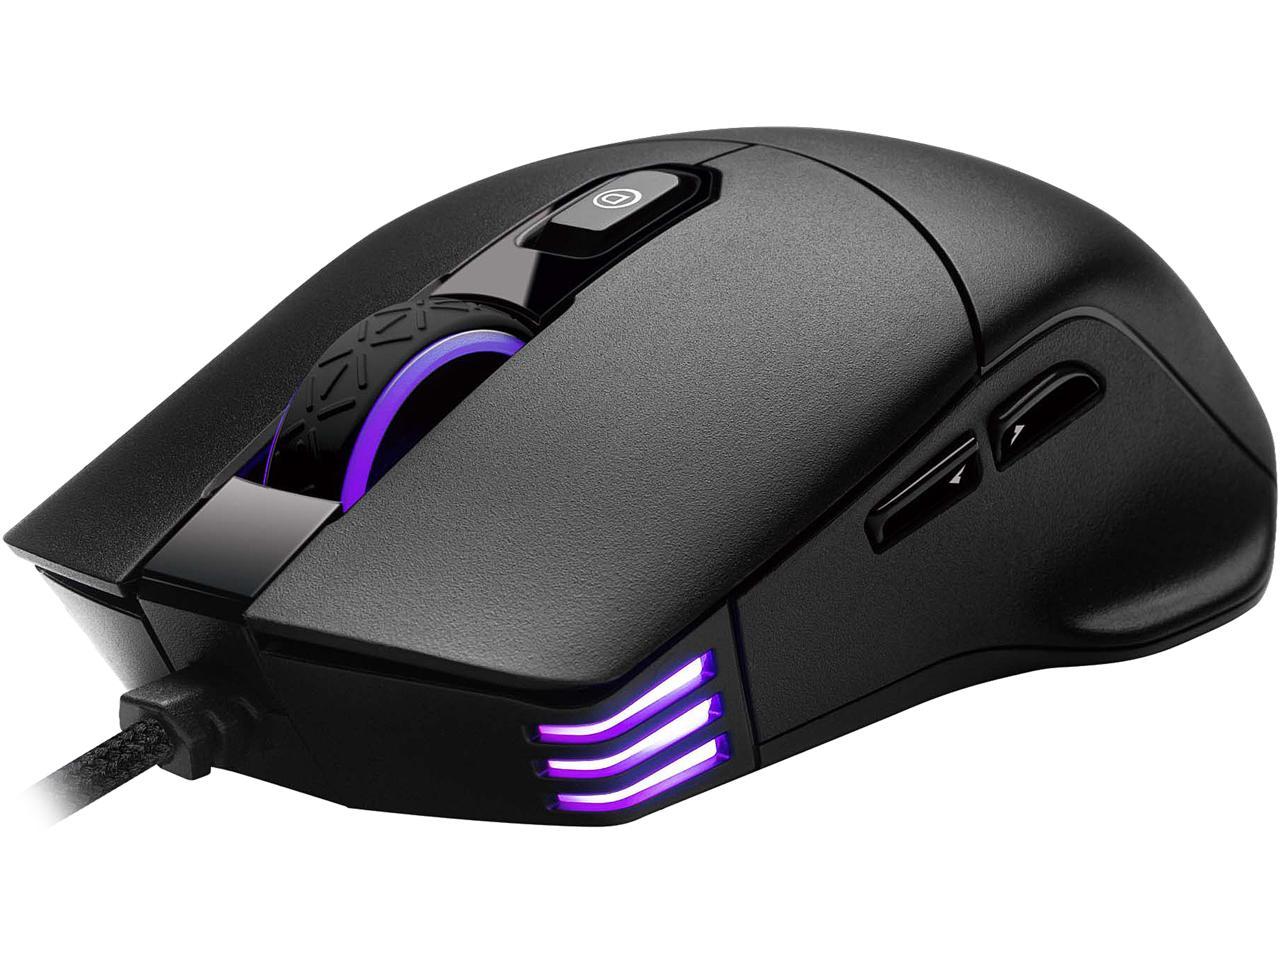 EVGA X12 Gaming Mouse in Black for $14.99